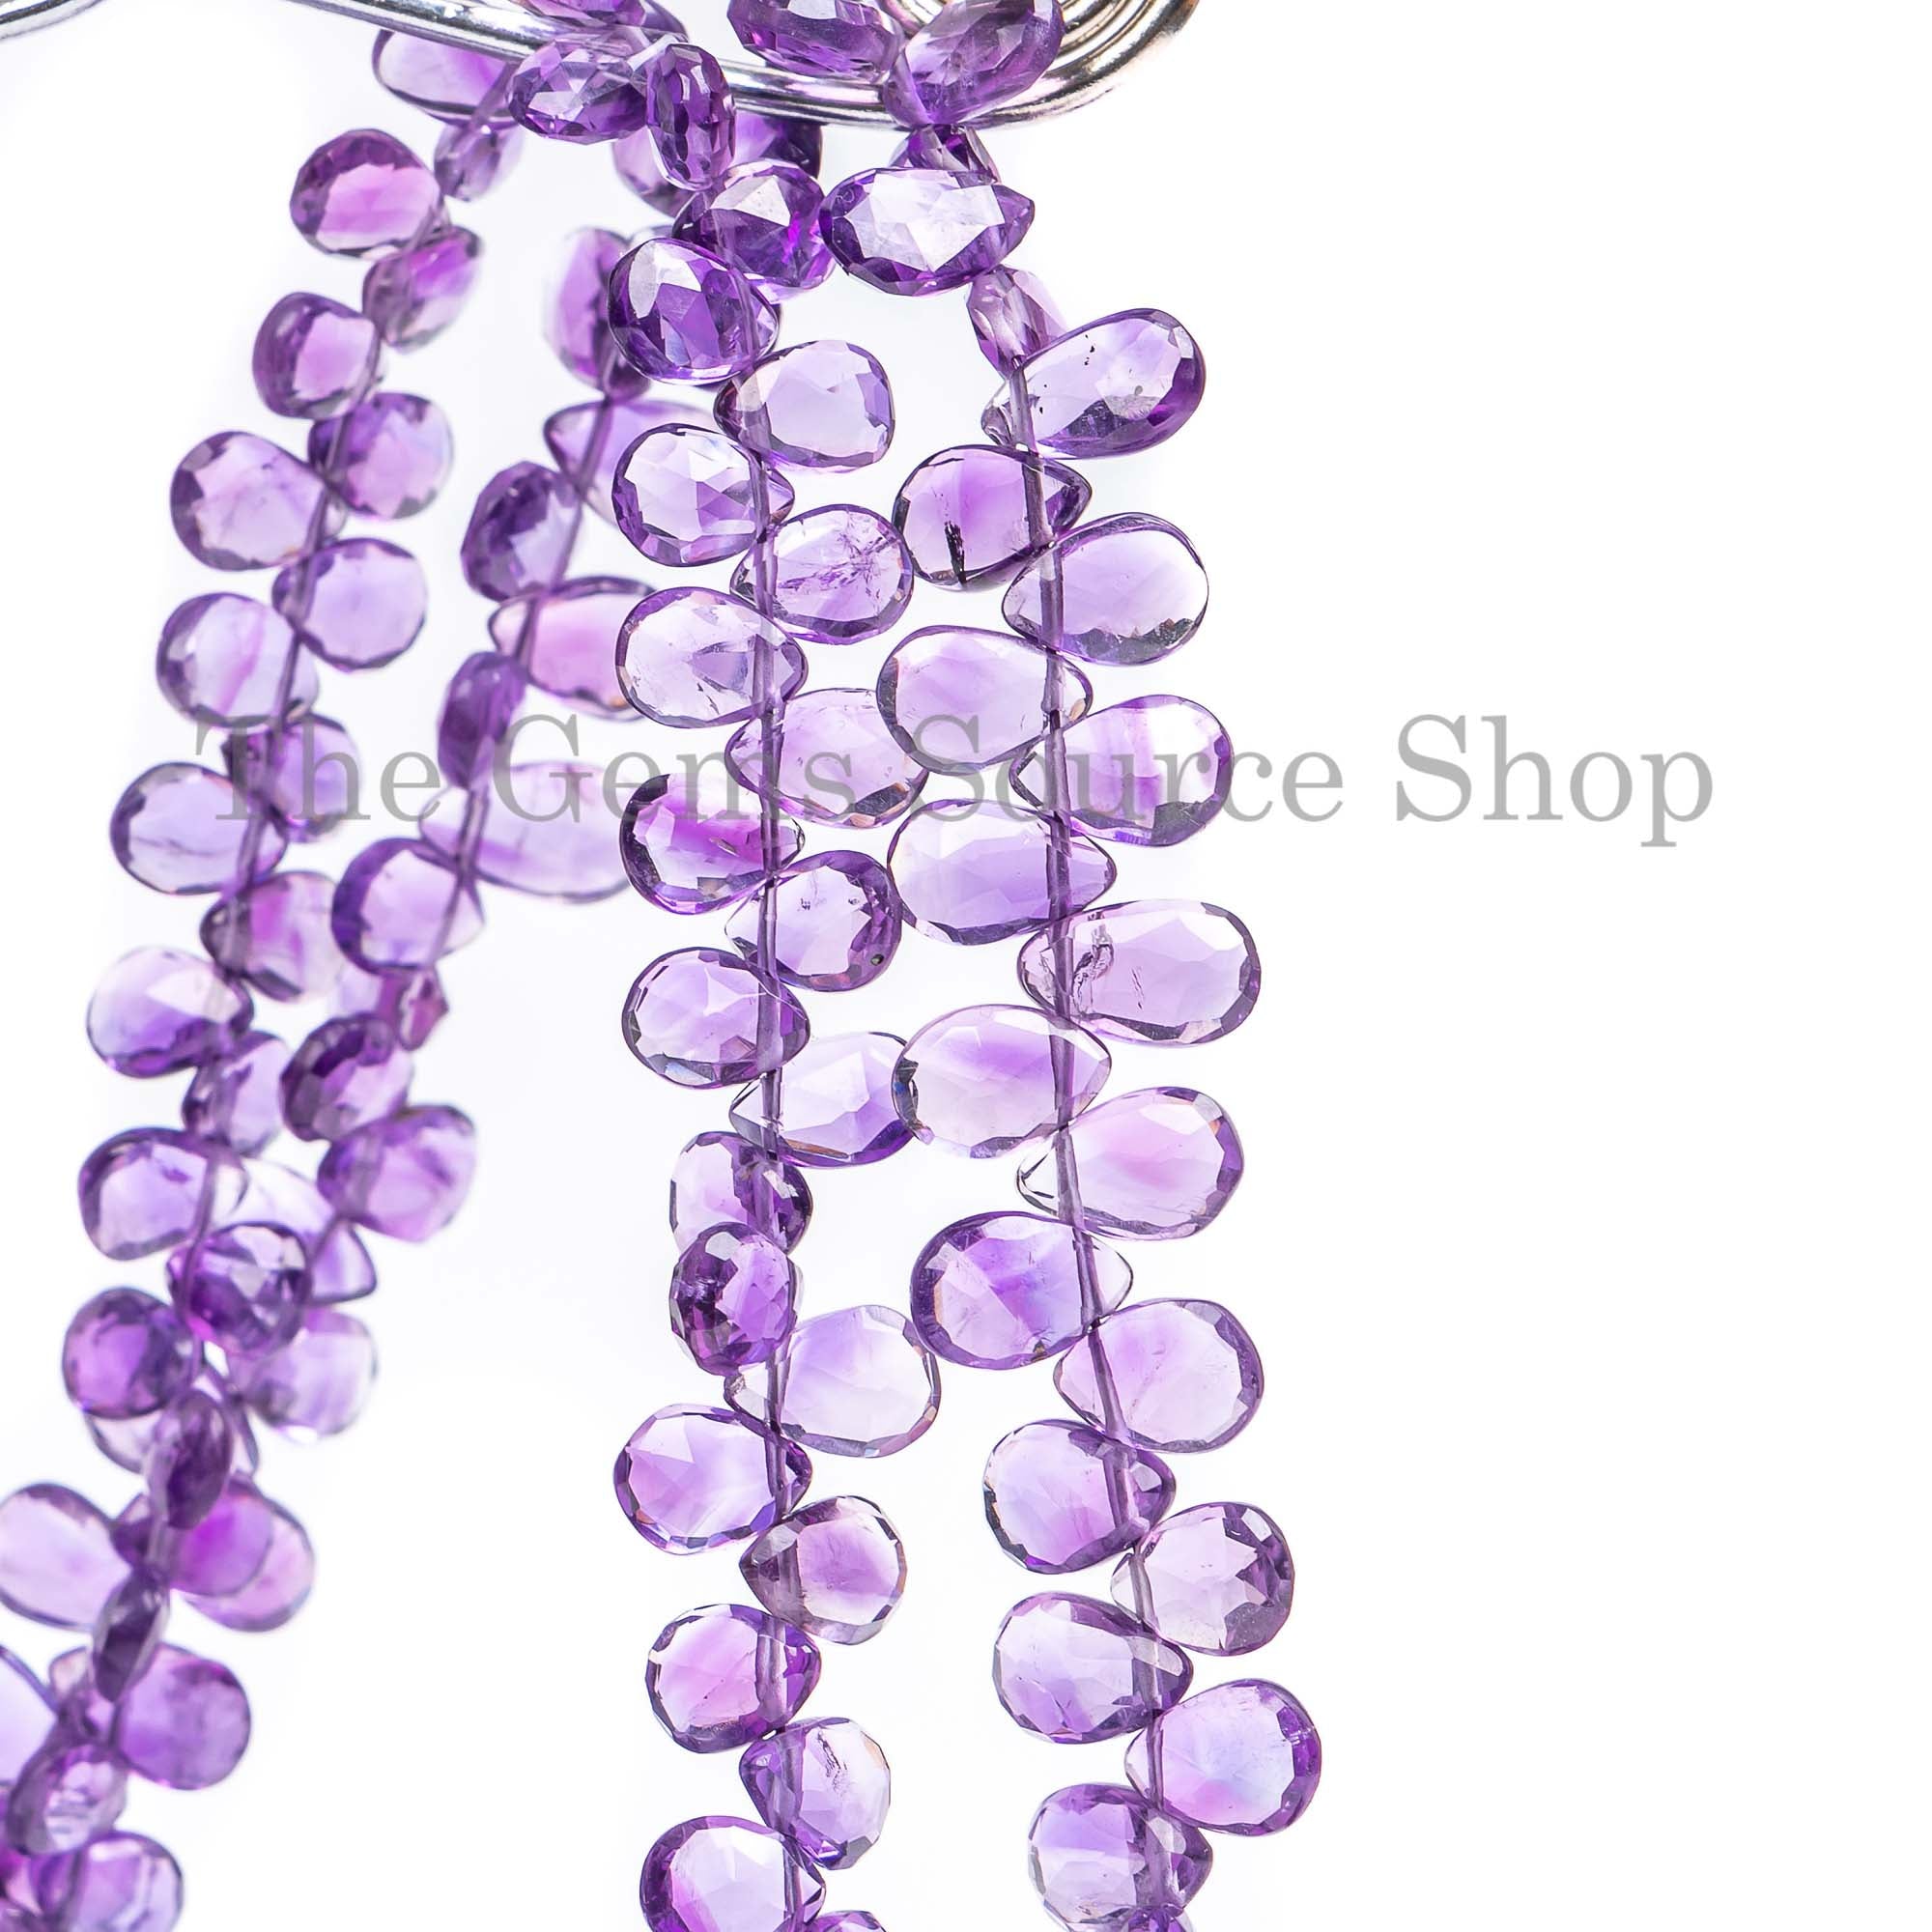 Amethyst Beads, Amethyst Pear Shape Beads, Amethyst Faceted Beads, Wholesale Beads